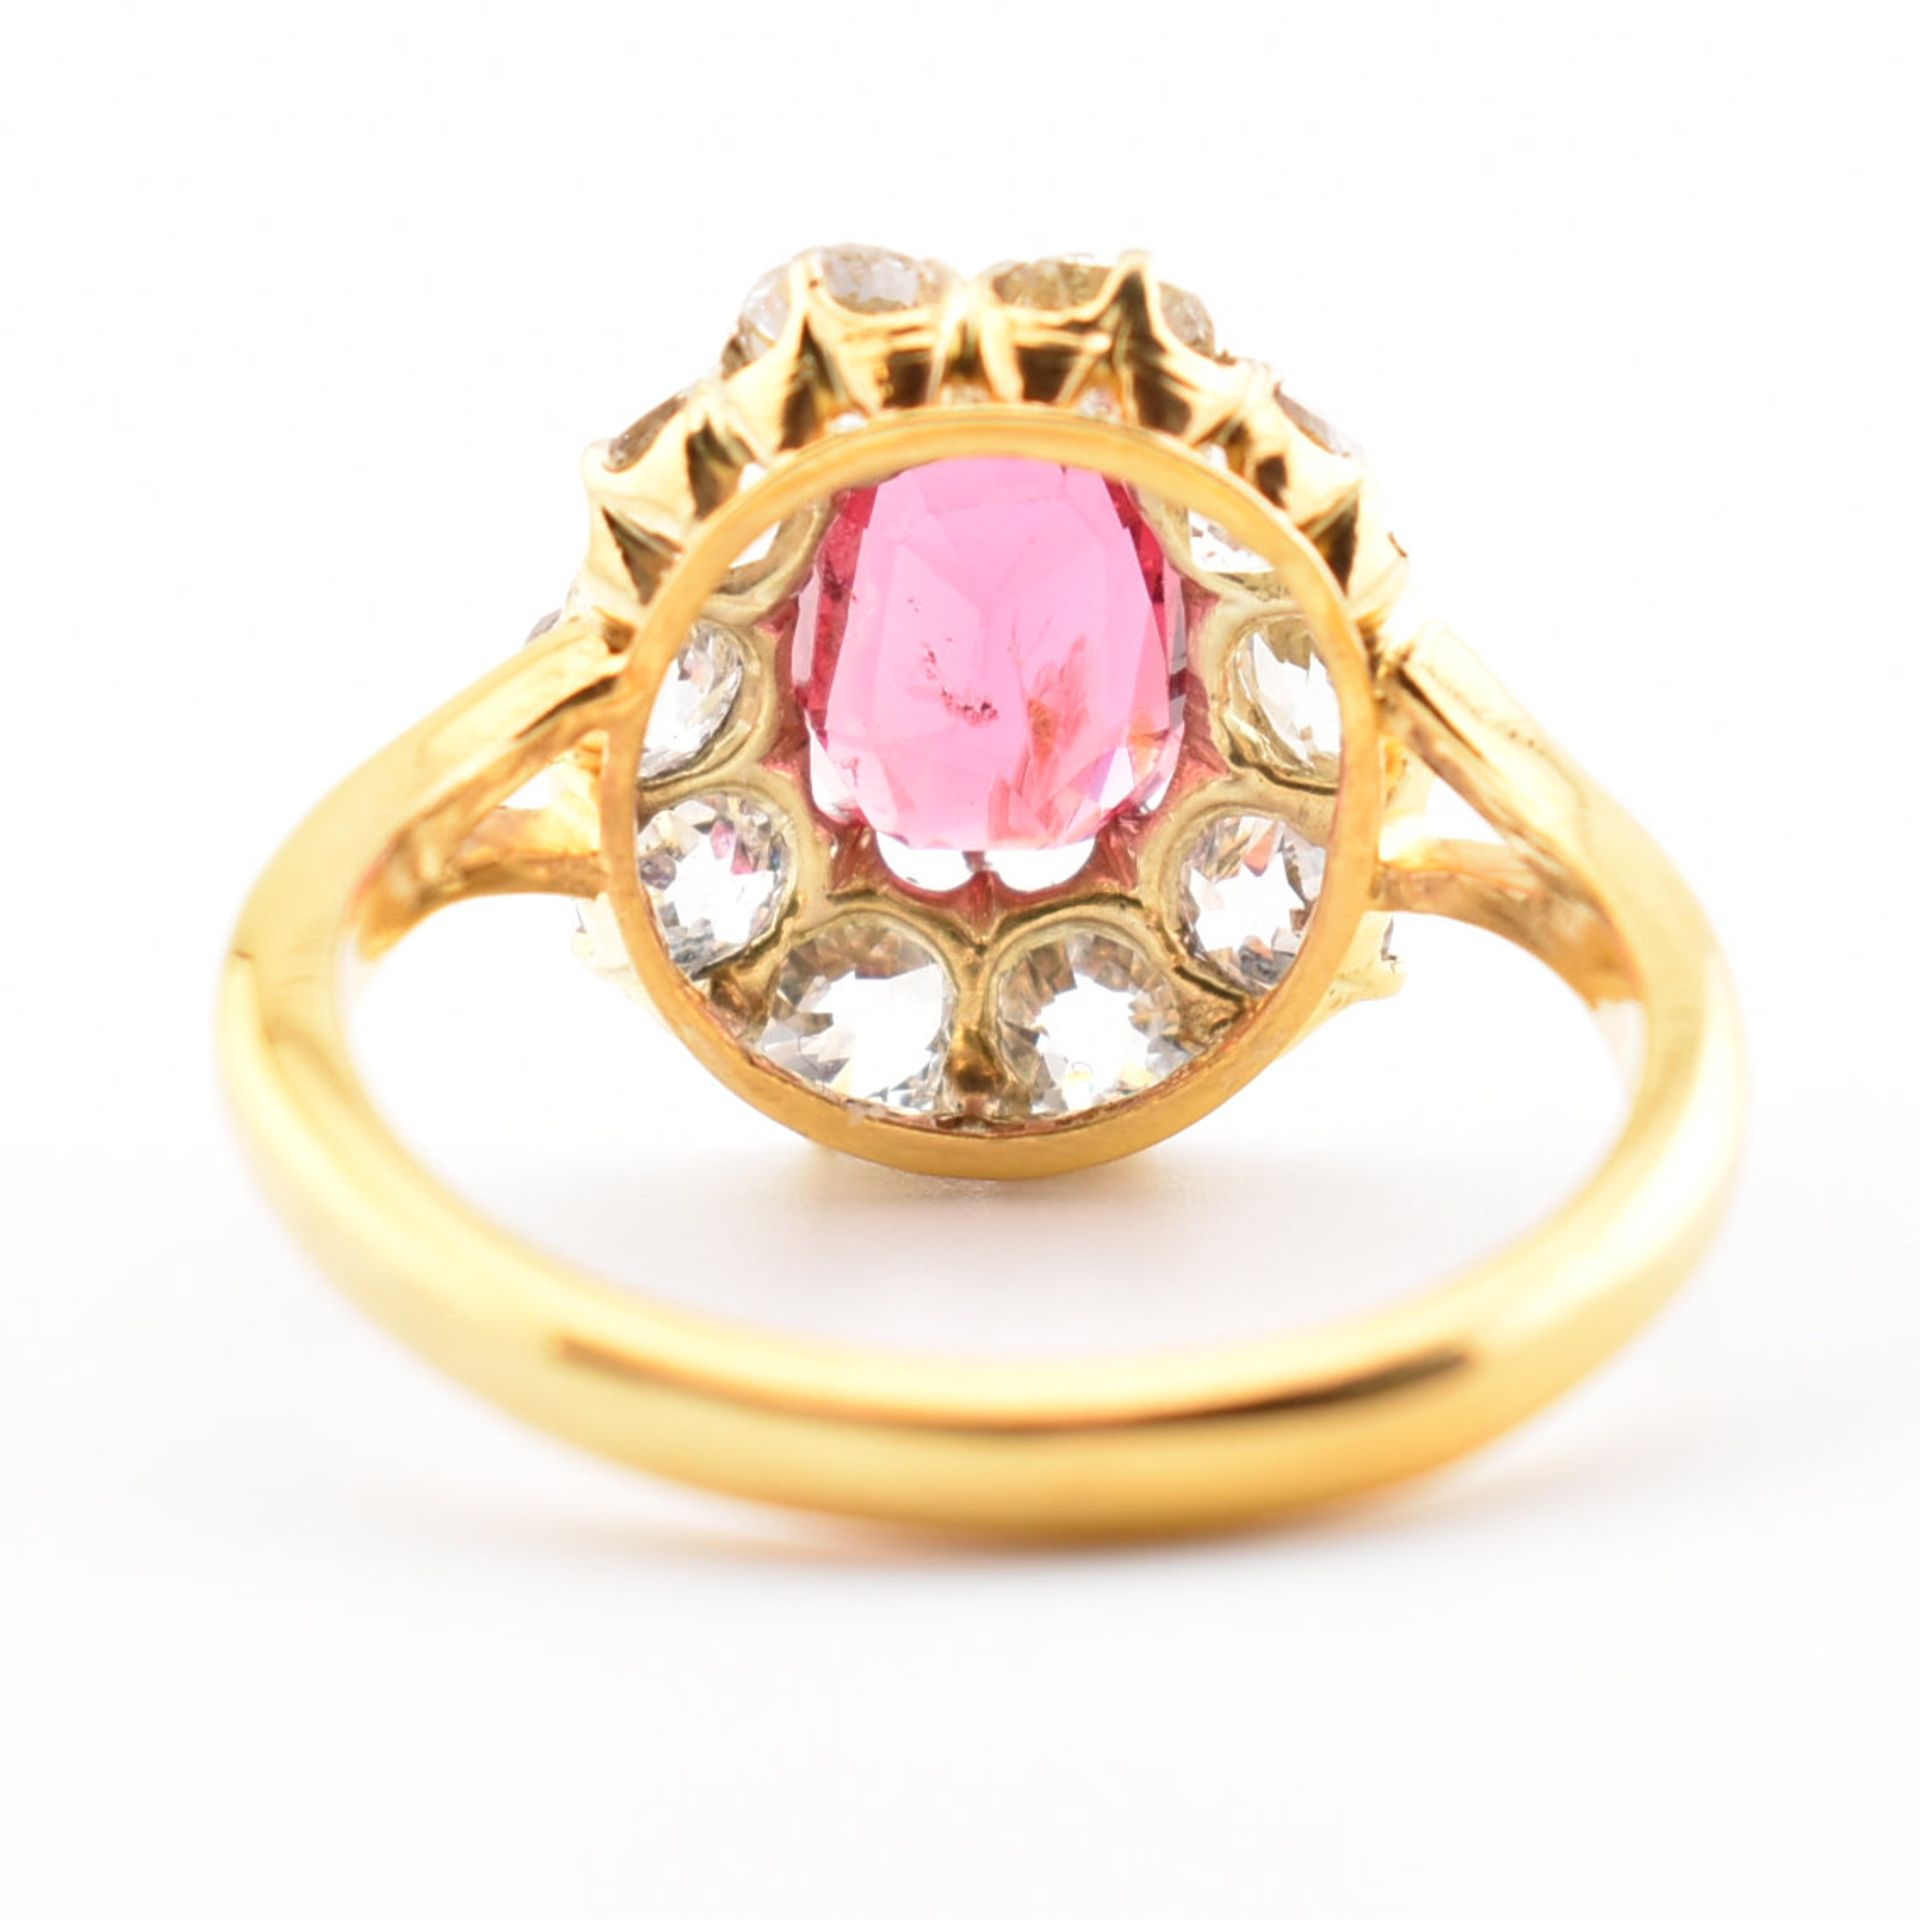 VICTORIAN RED SPINEL & DIAMOND CLUSTER RING - Image 5 of 12